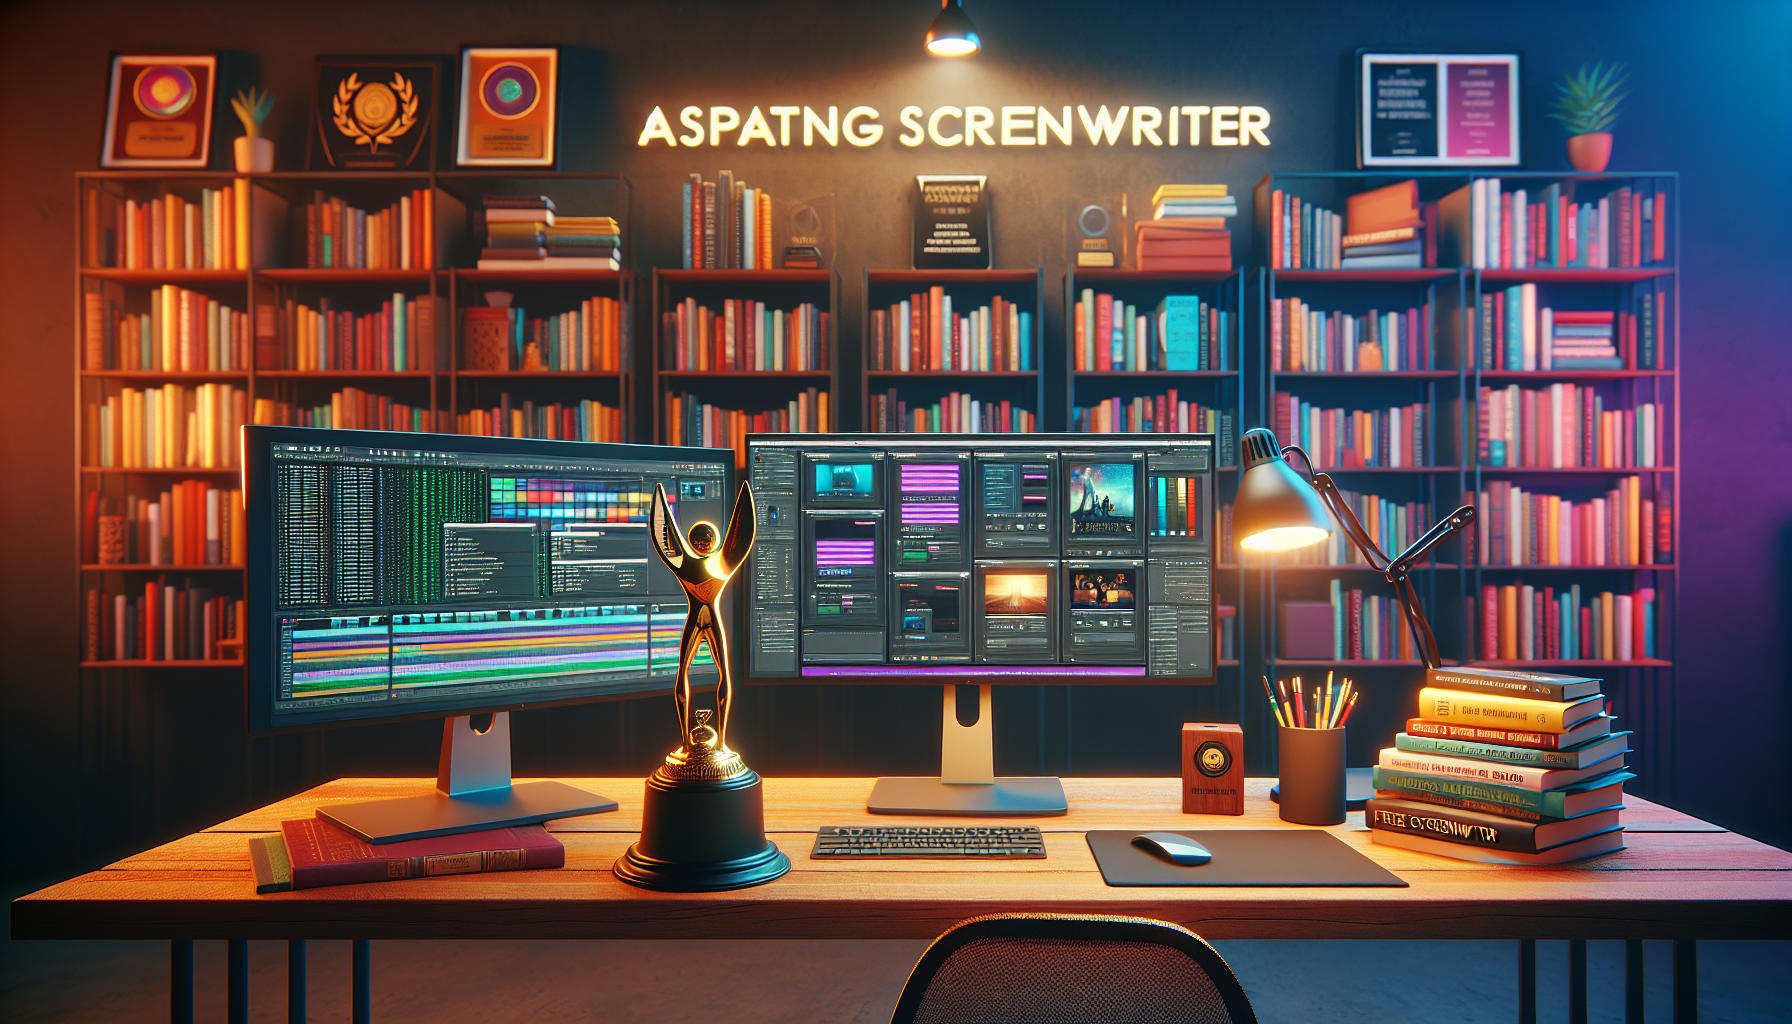 A digital artist's workstation with multiple screens displaying various free screenwriting software interfaces, surrounded by shelves filled with film and screenplay books, cozy lighting, and a visibl